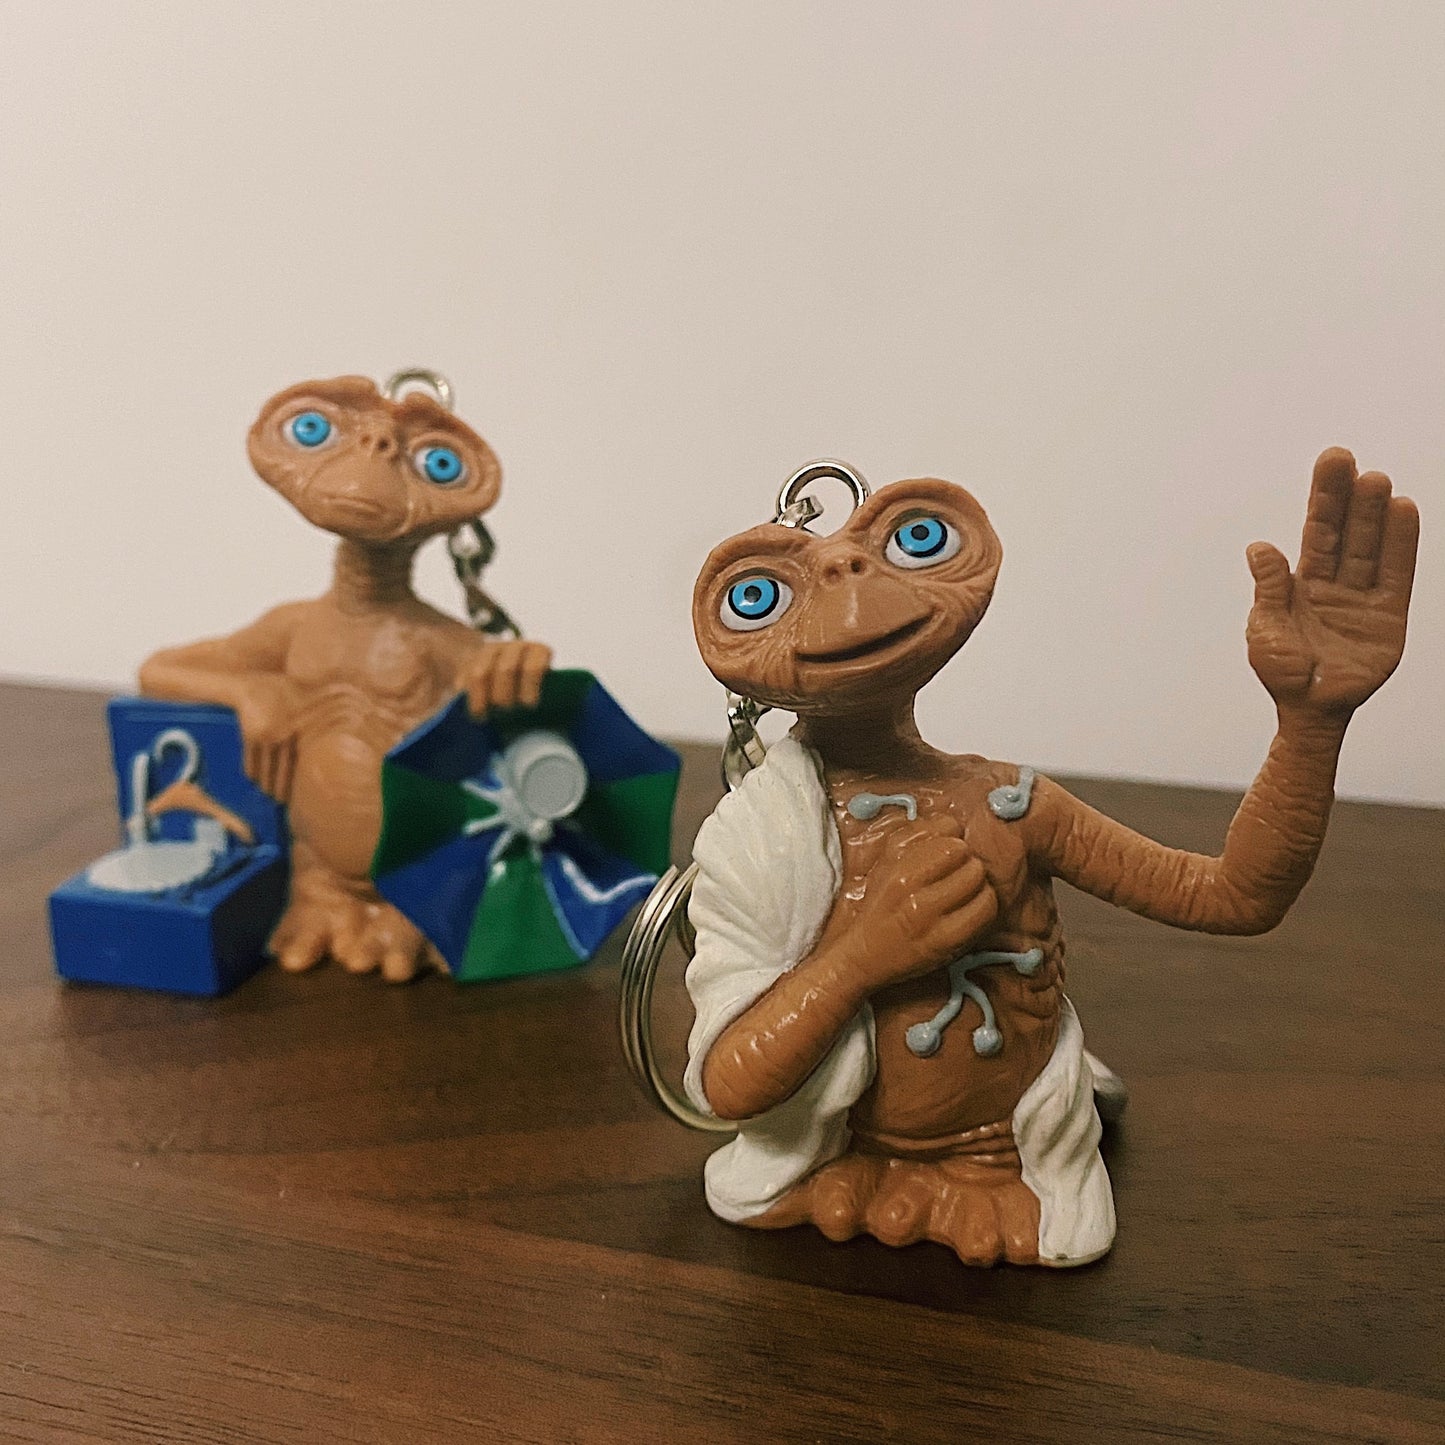 E.T. THE EXTRA TERRESTRIAL